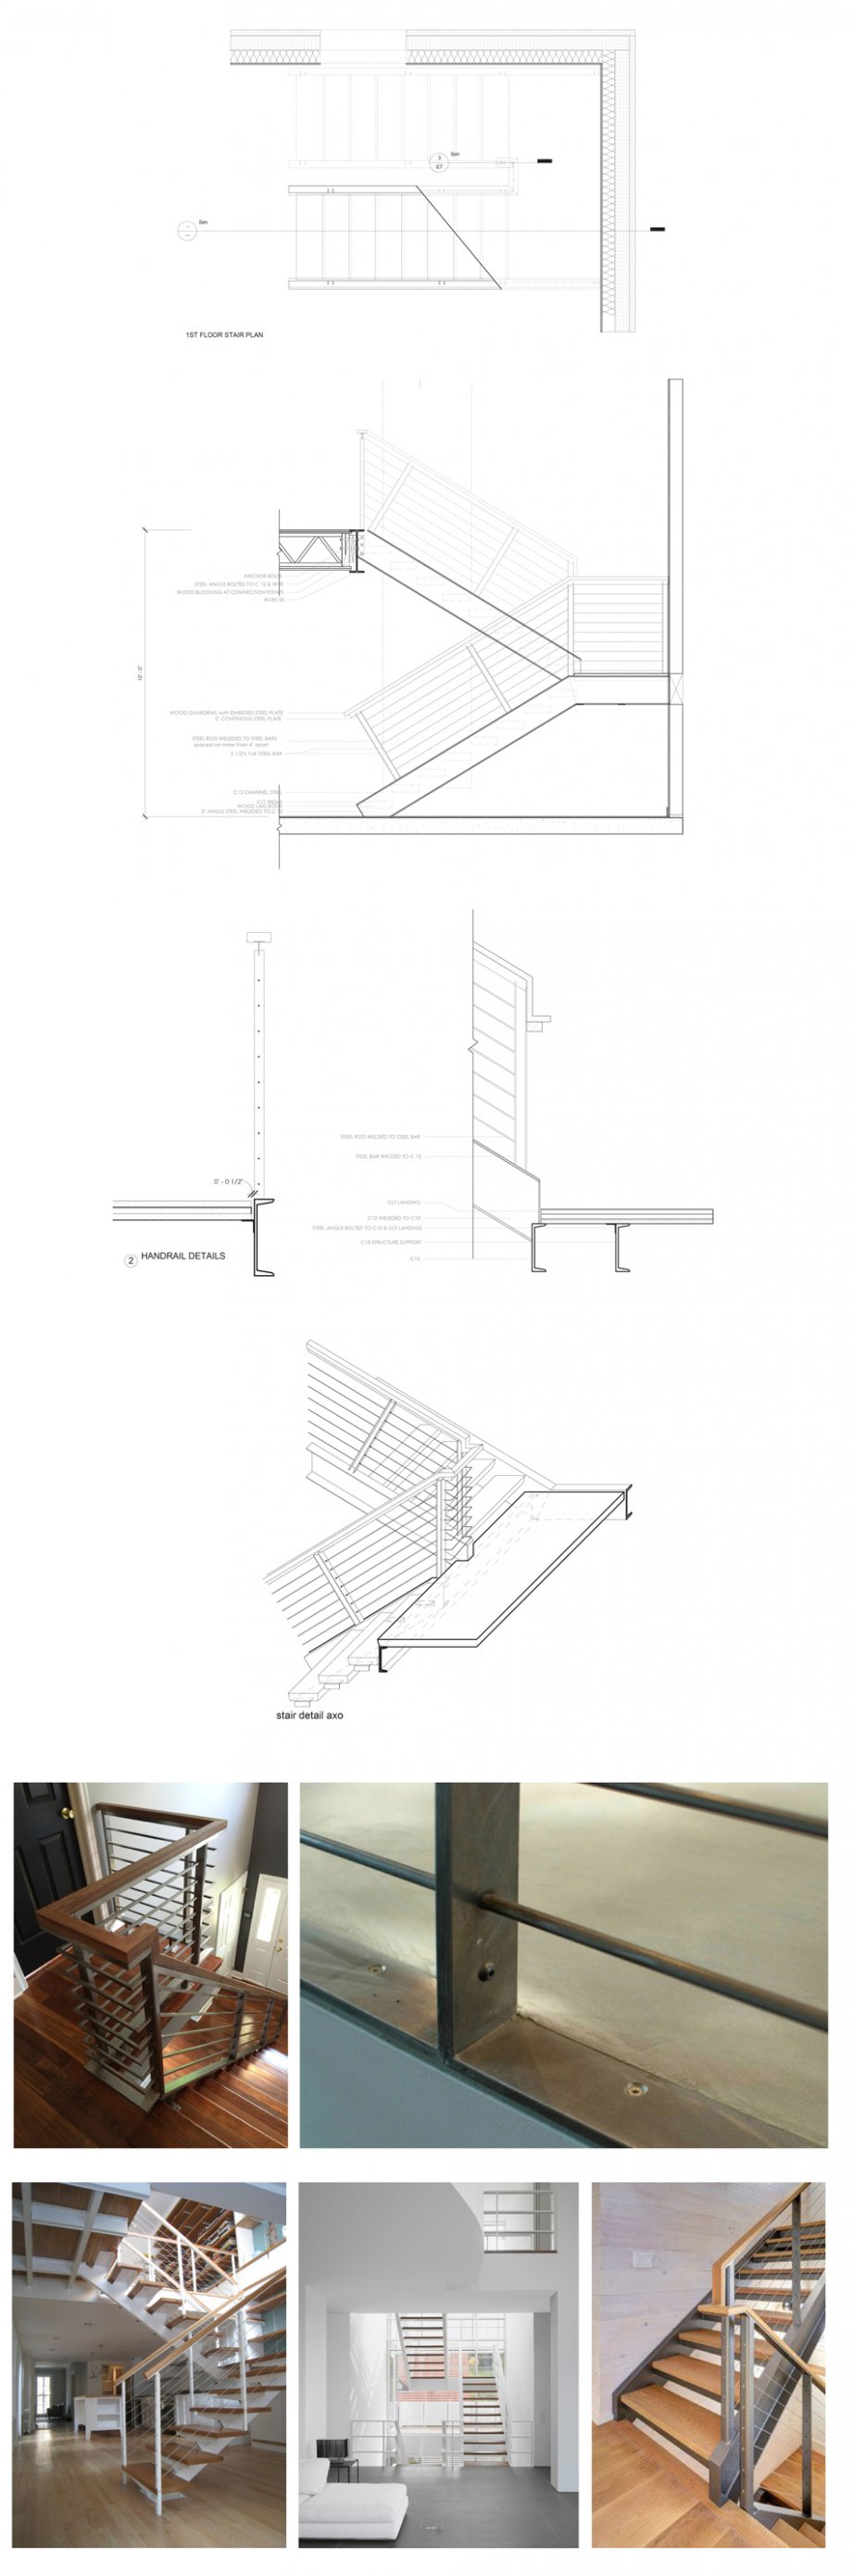 Design details for the custom stairs built by the students, as well as precedent images. 